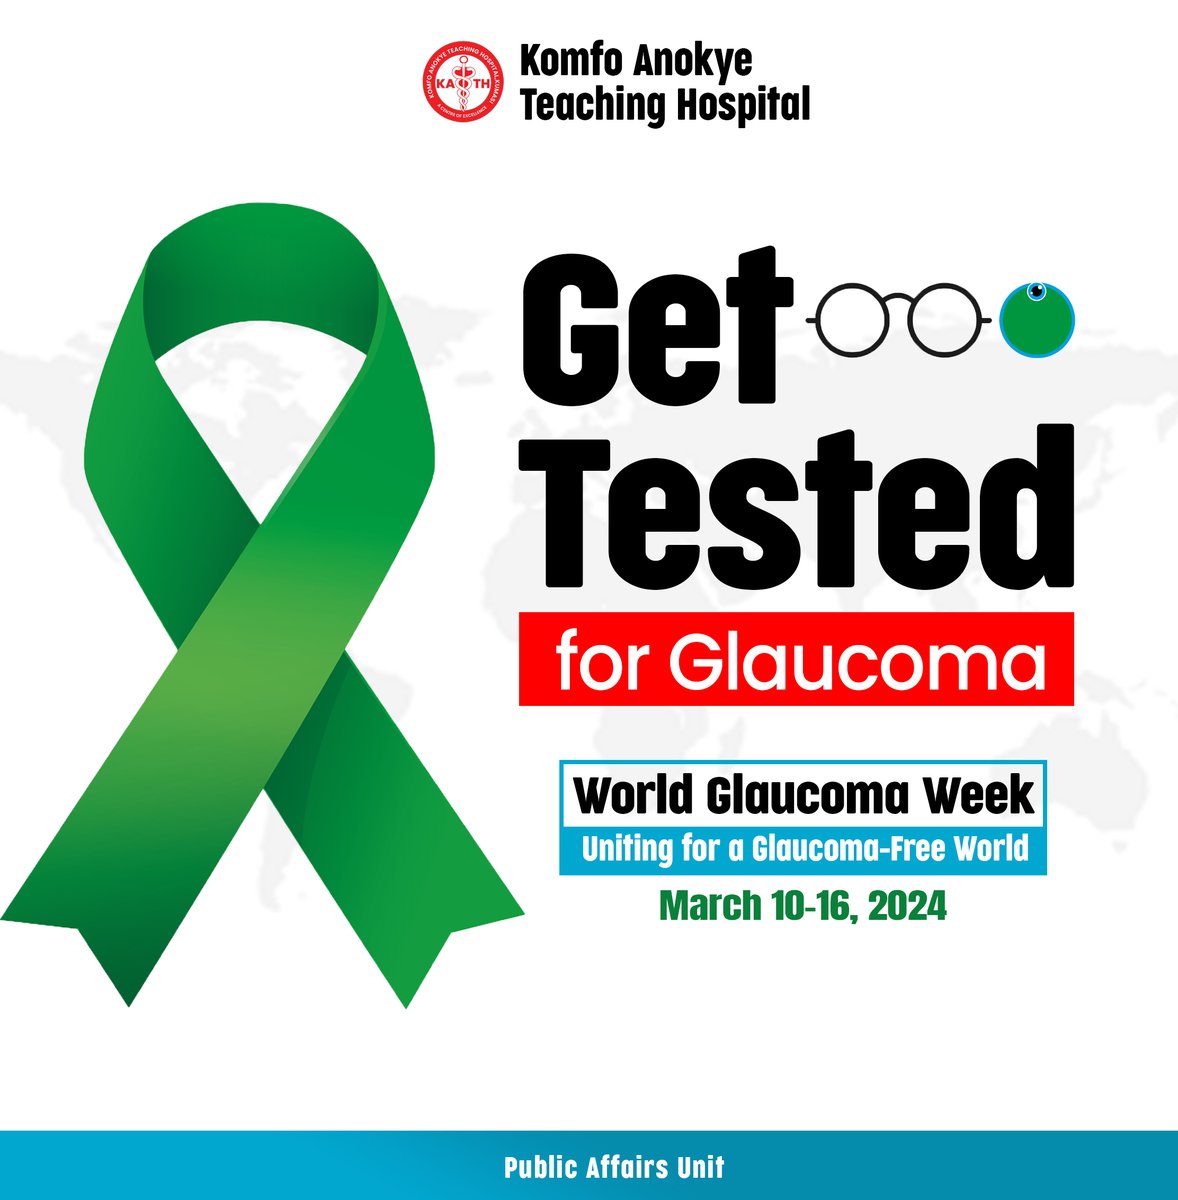 Glaucoma is a chronic, progressive, degenerative disorder of the optic nerve that produces characteristic visual field damage.
Glaucoma is the second cause of blindness, and importantly: it is irreversible. Get tested for Glaucoma.
#glaucomaawareness #glaucomaweek